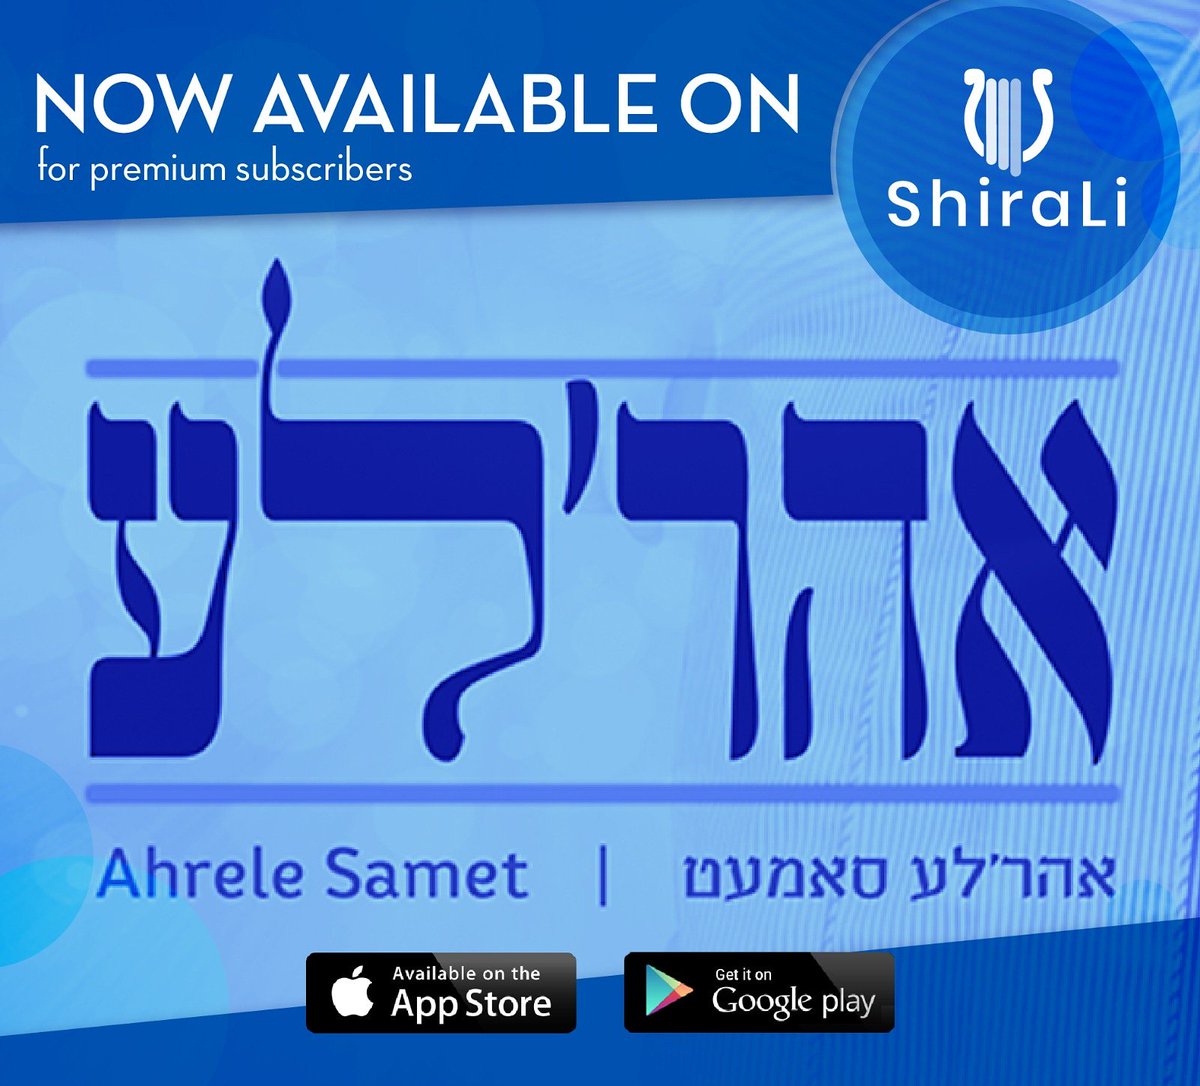 Now available to stream on the ShiraLi app for PREMIUM users the newly released album by Arele Samet. 

#shirali #jewishmusic #Jewish #newlyreleased #music #Premium